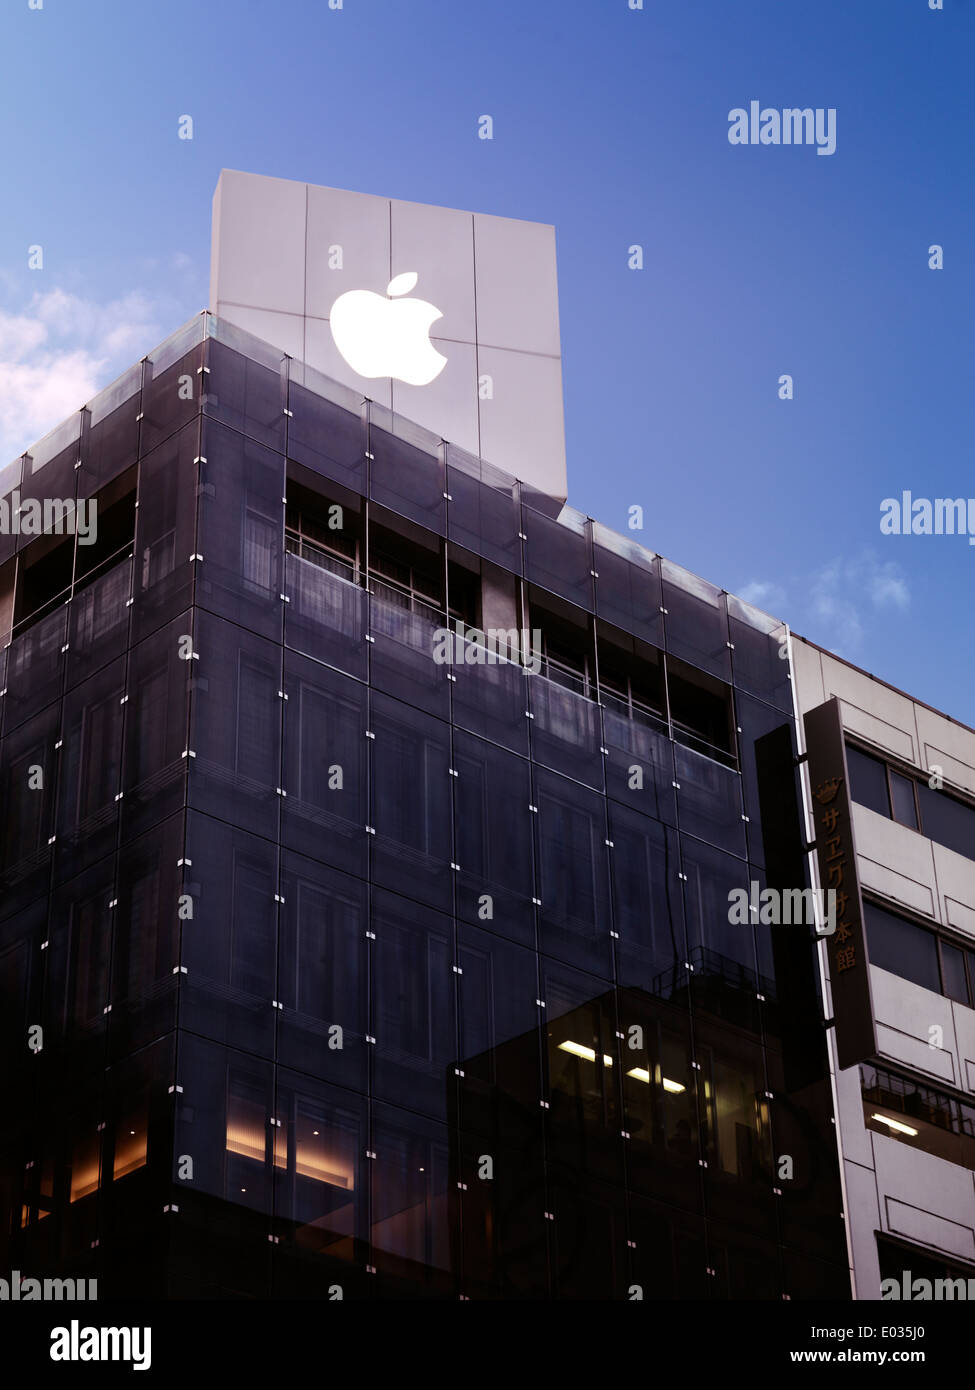 Large Apple logo on Apple store building in Ginza, Tokyo, Japan Stock Photo